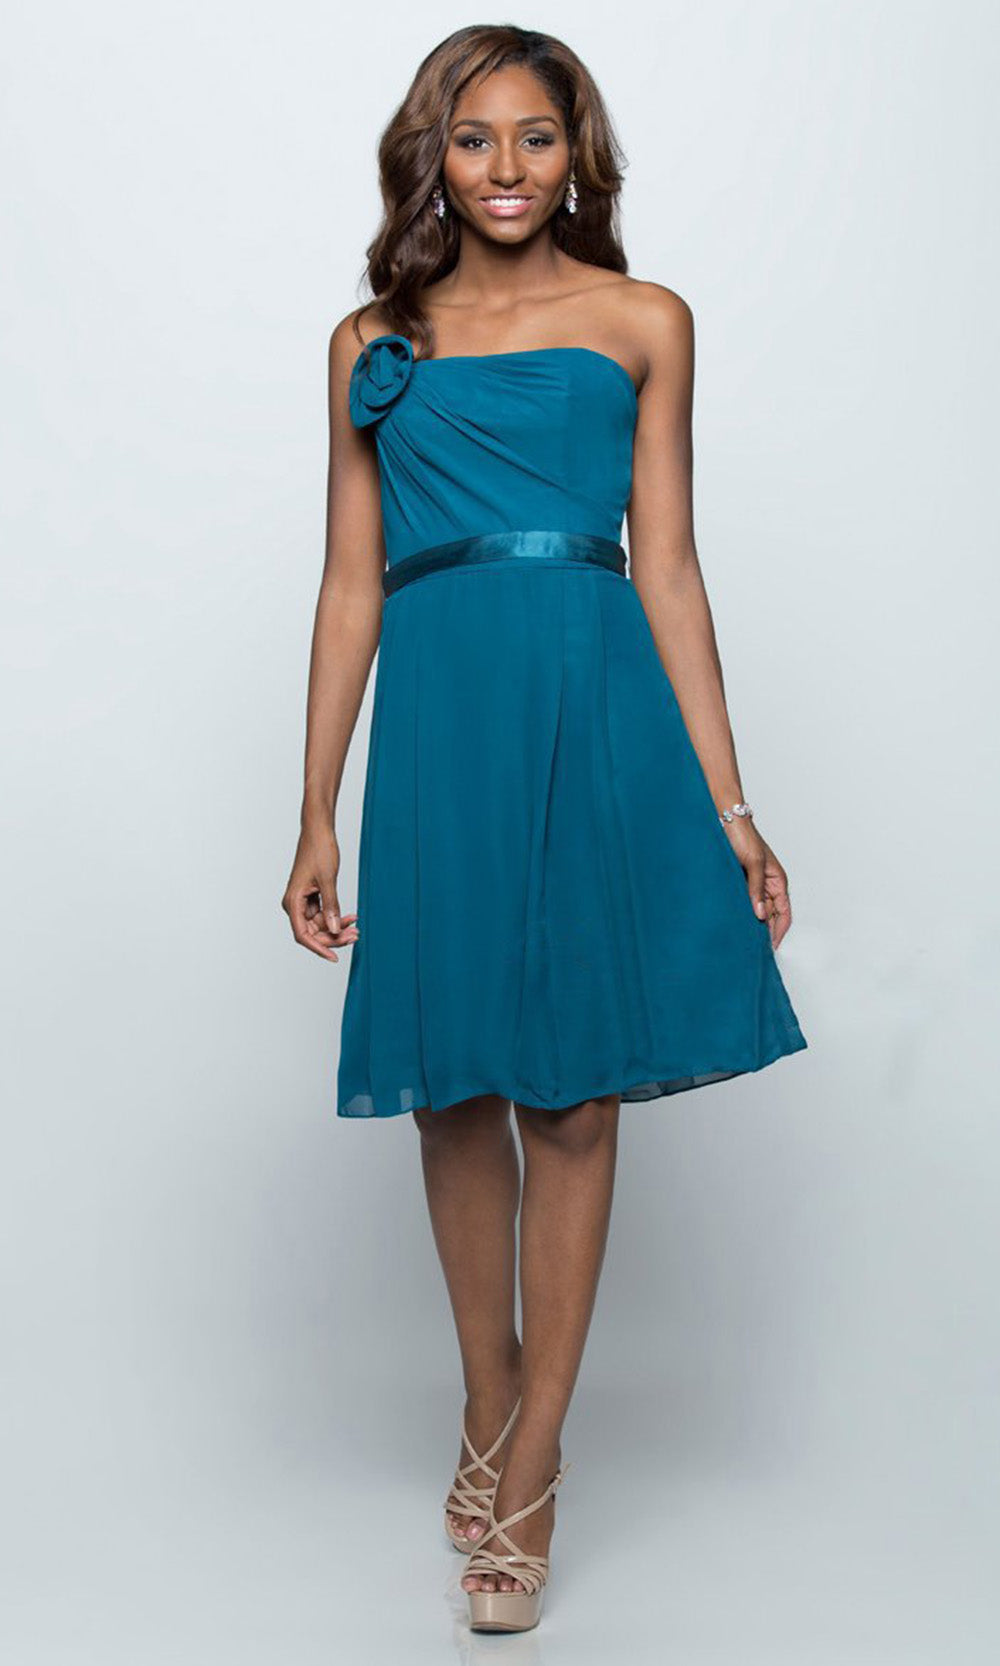 Milano Formals - Floral Accented Strapless A-Line Dress in Blue and Green